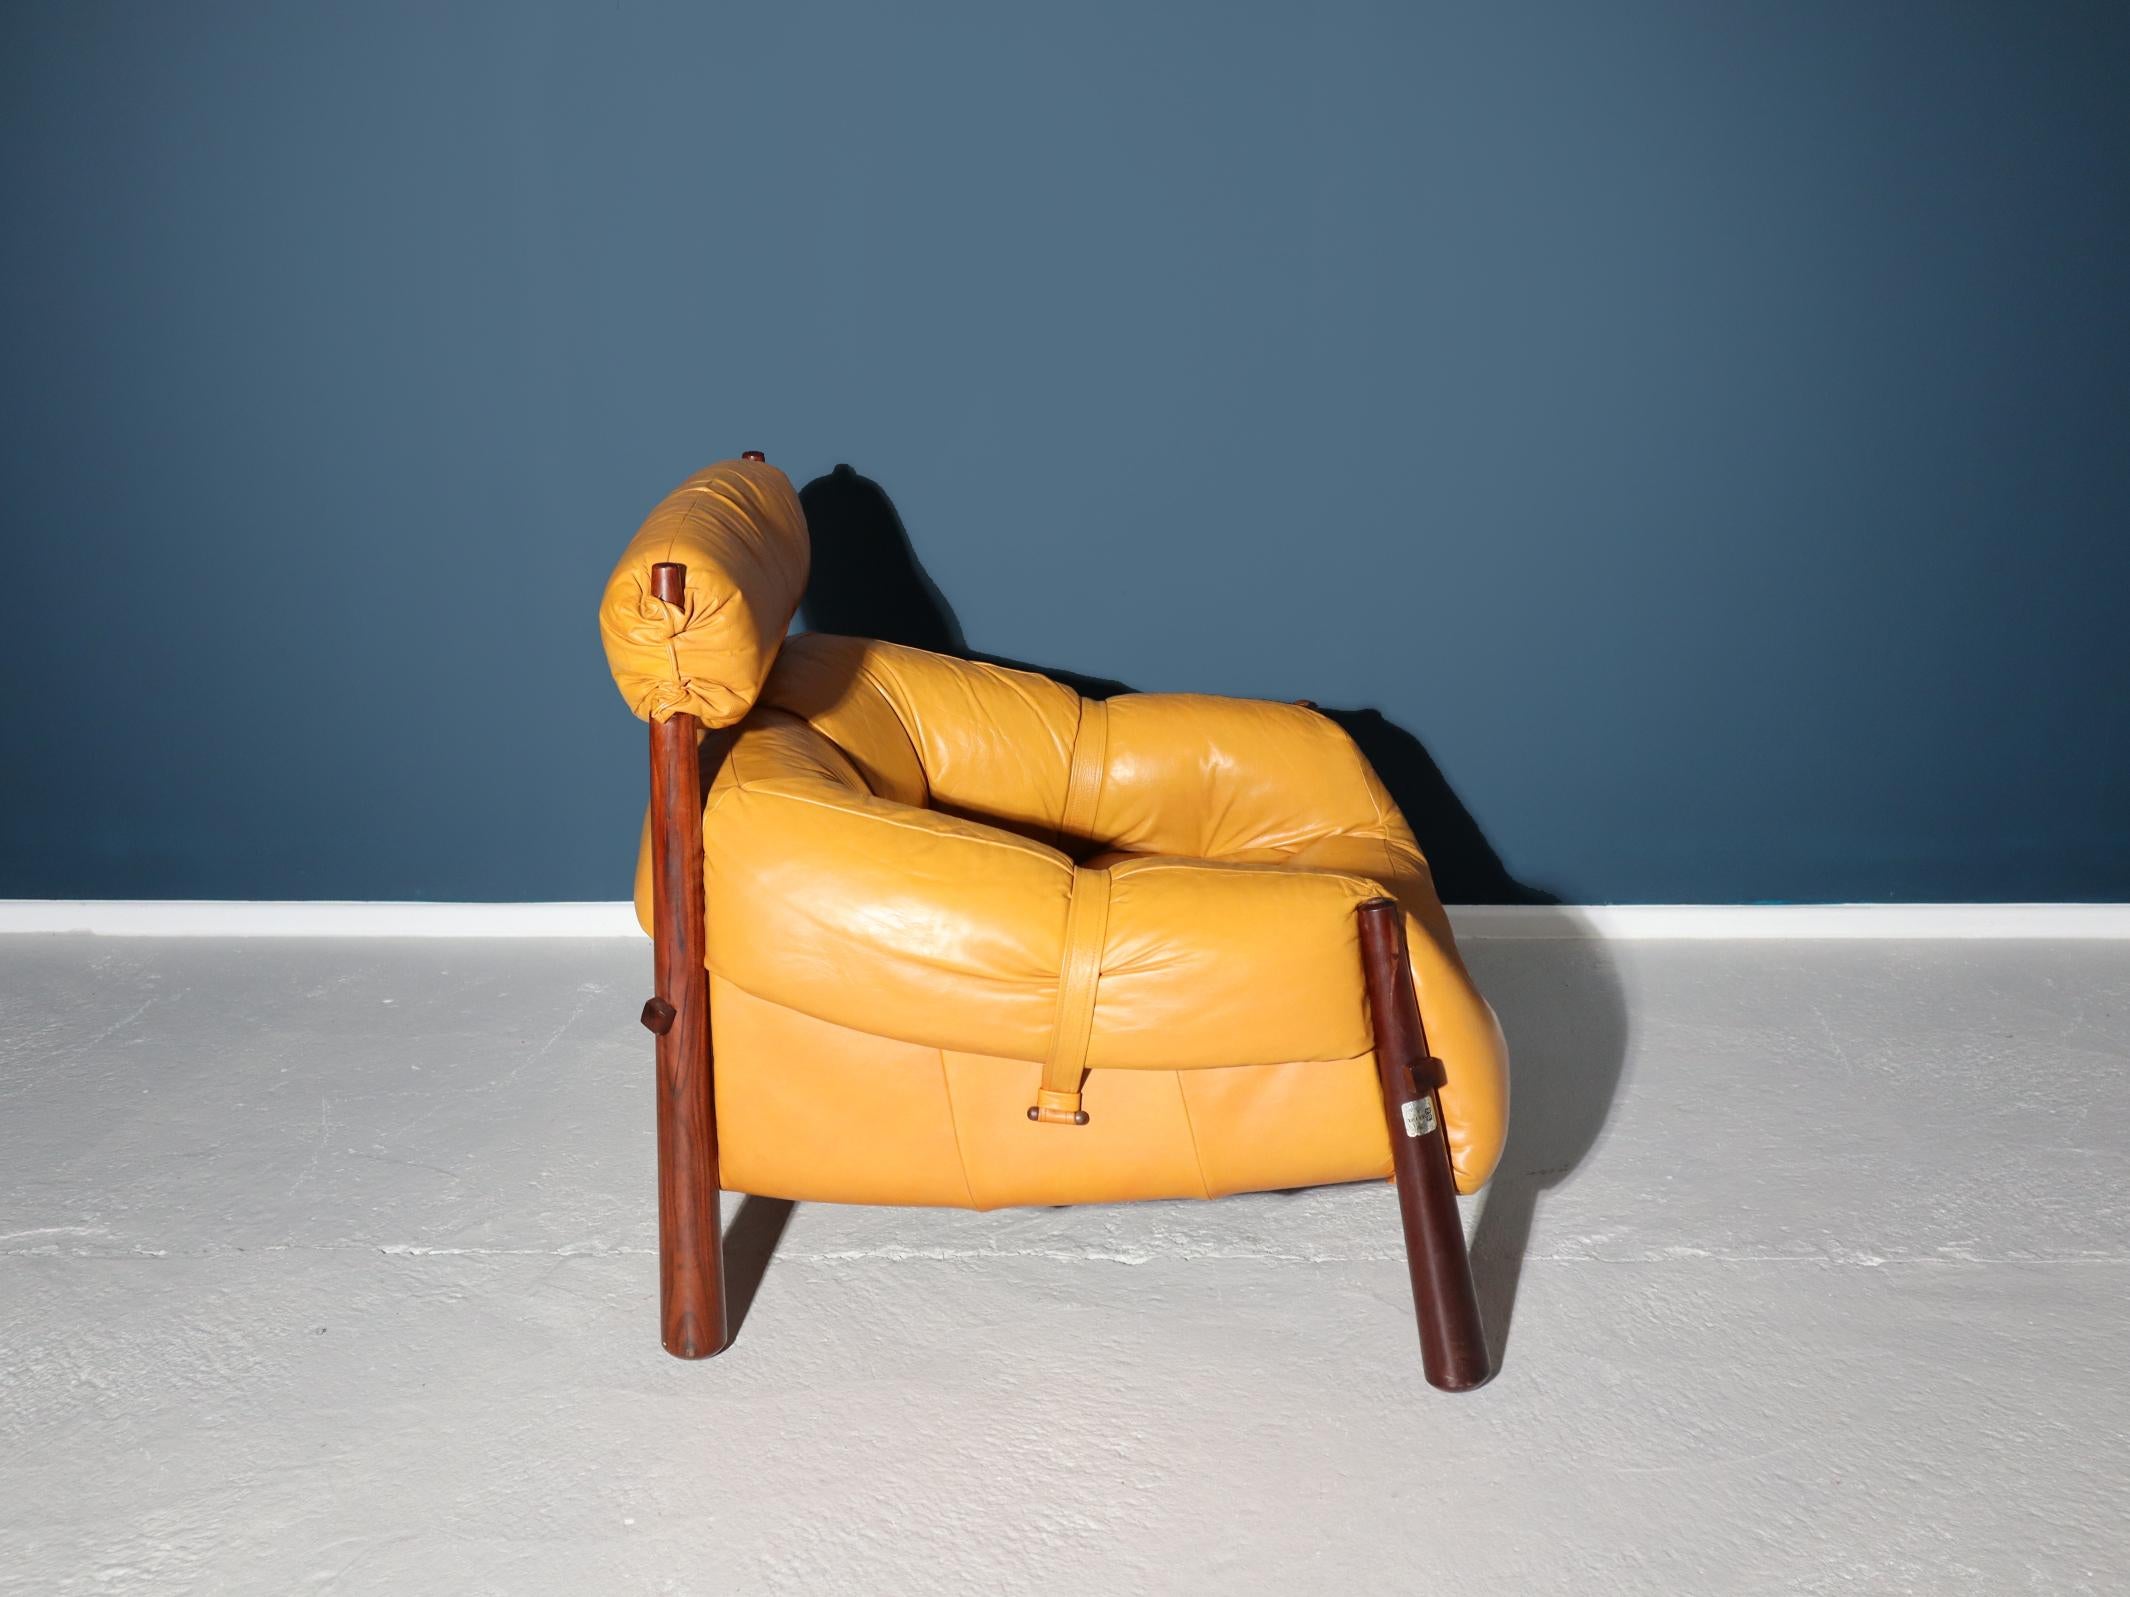 Leather Percival Lafer ‘MP-81’ Lounge chair with original patina leather, Brazil 1970s